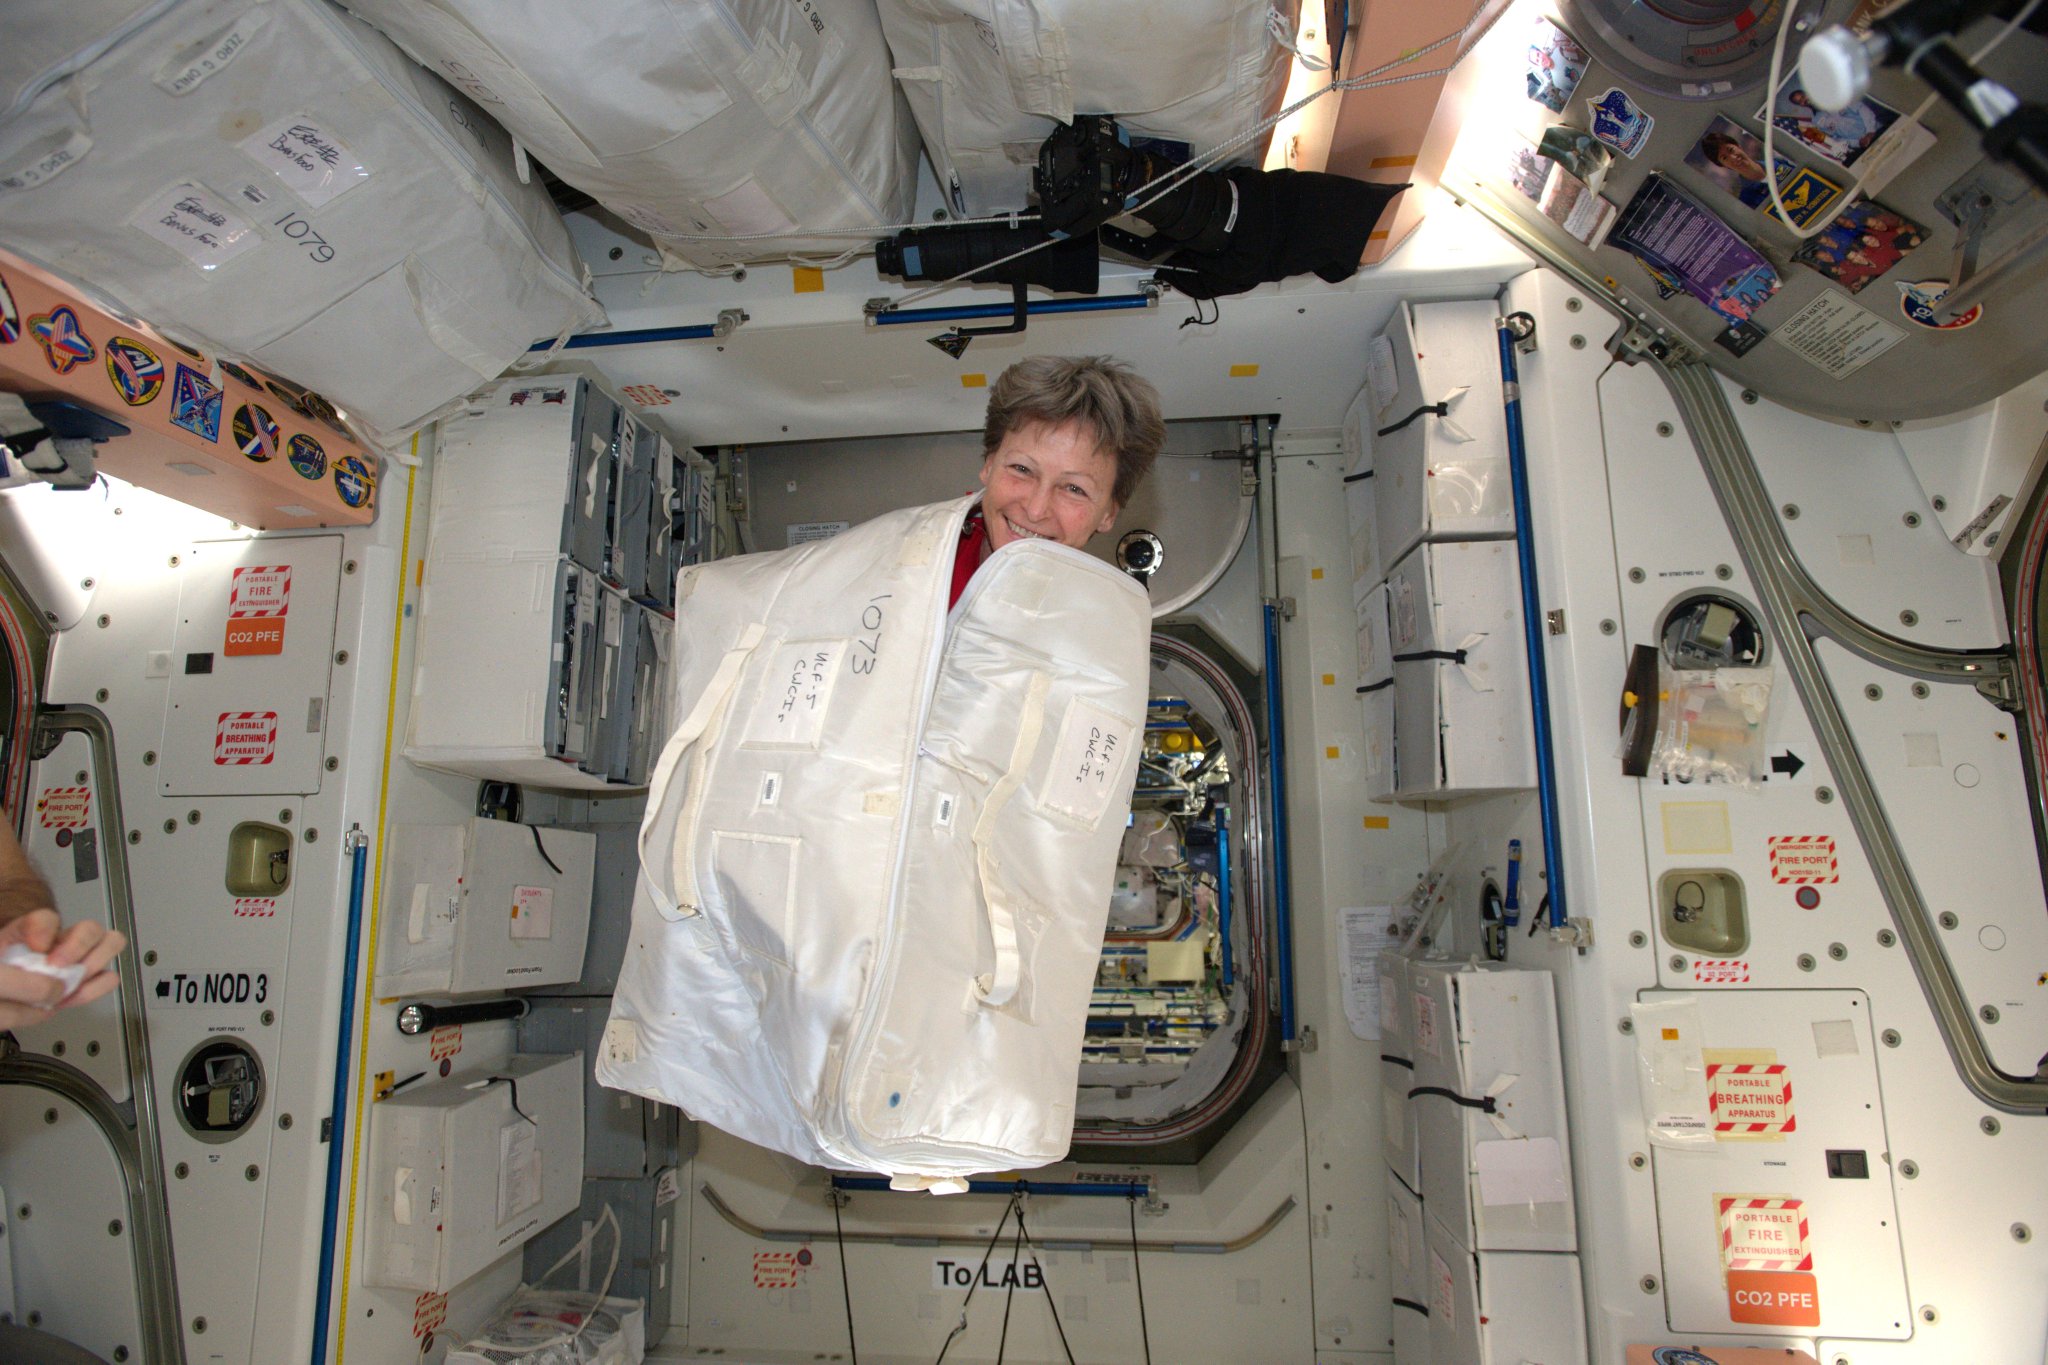 Peggy Whitson is smiling as her head pops out of the partially unzipped white cargo bag while 'floating' in zero gravity on the International Space Station.